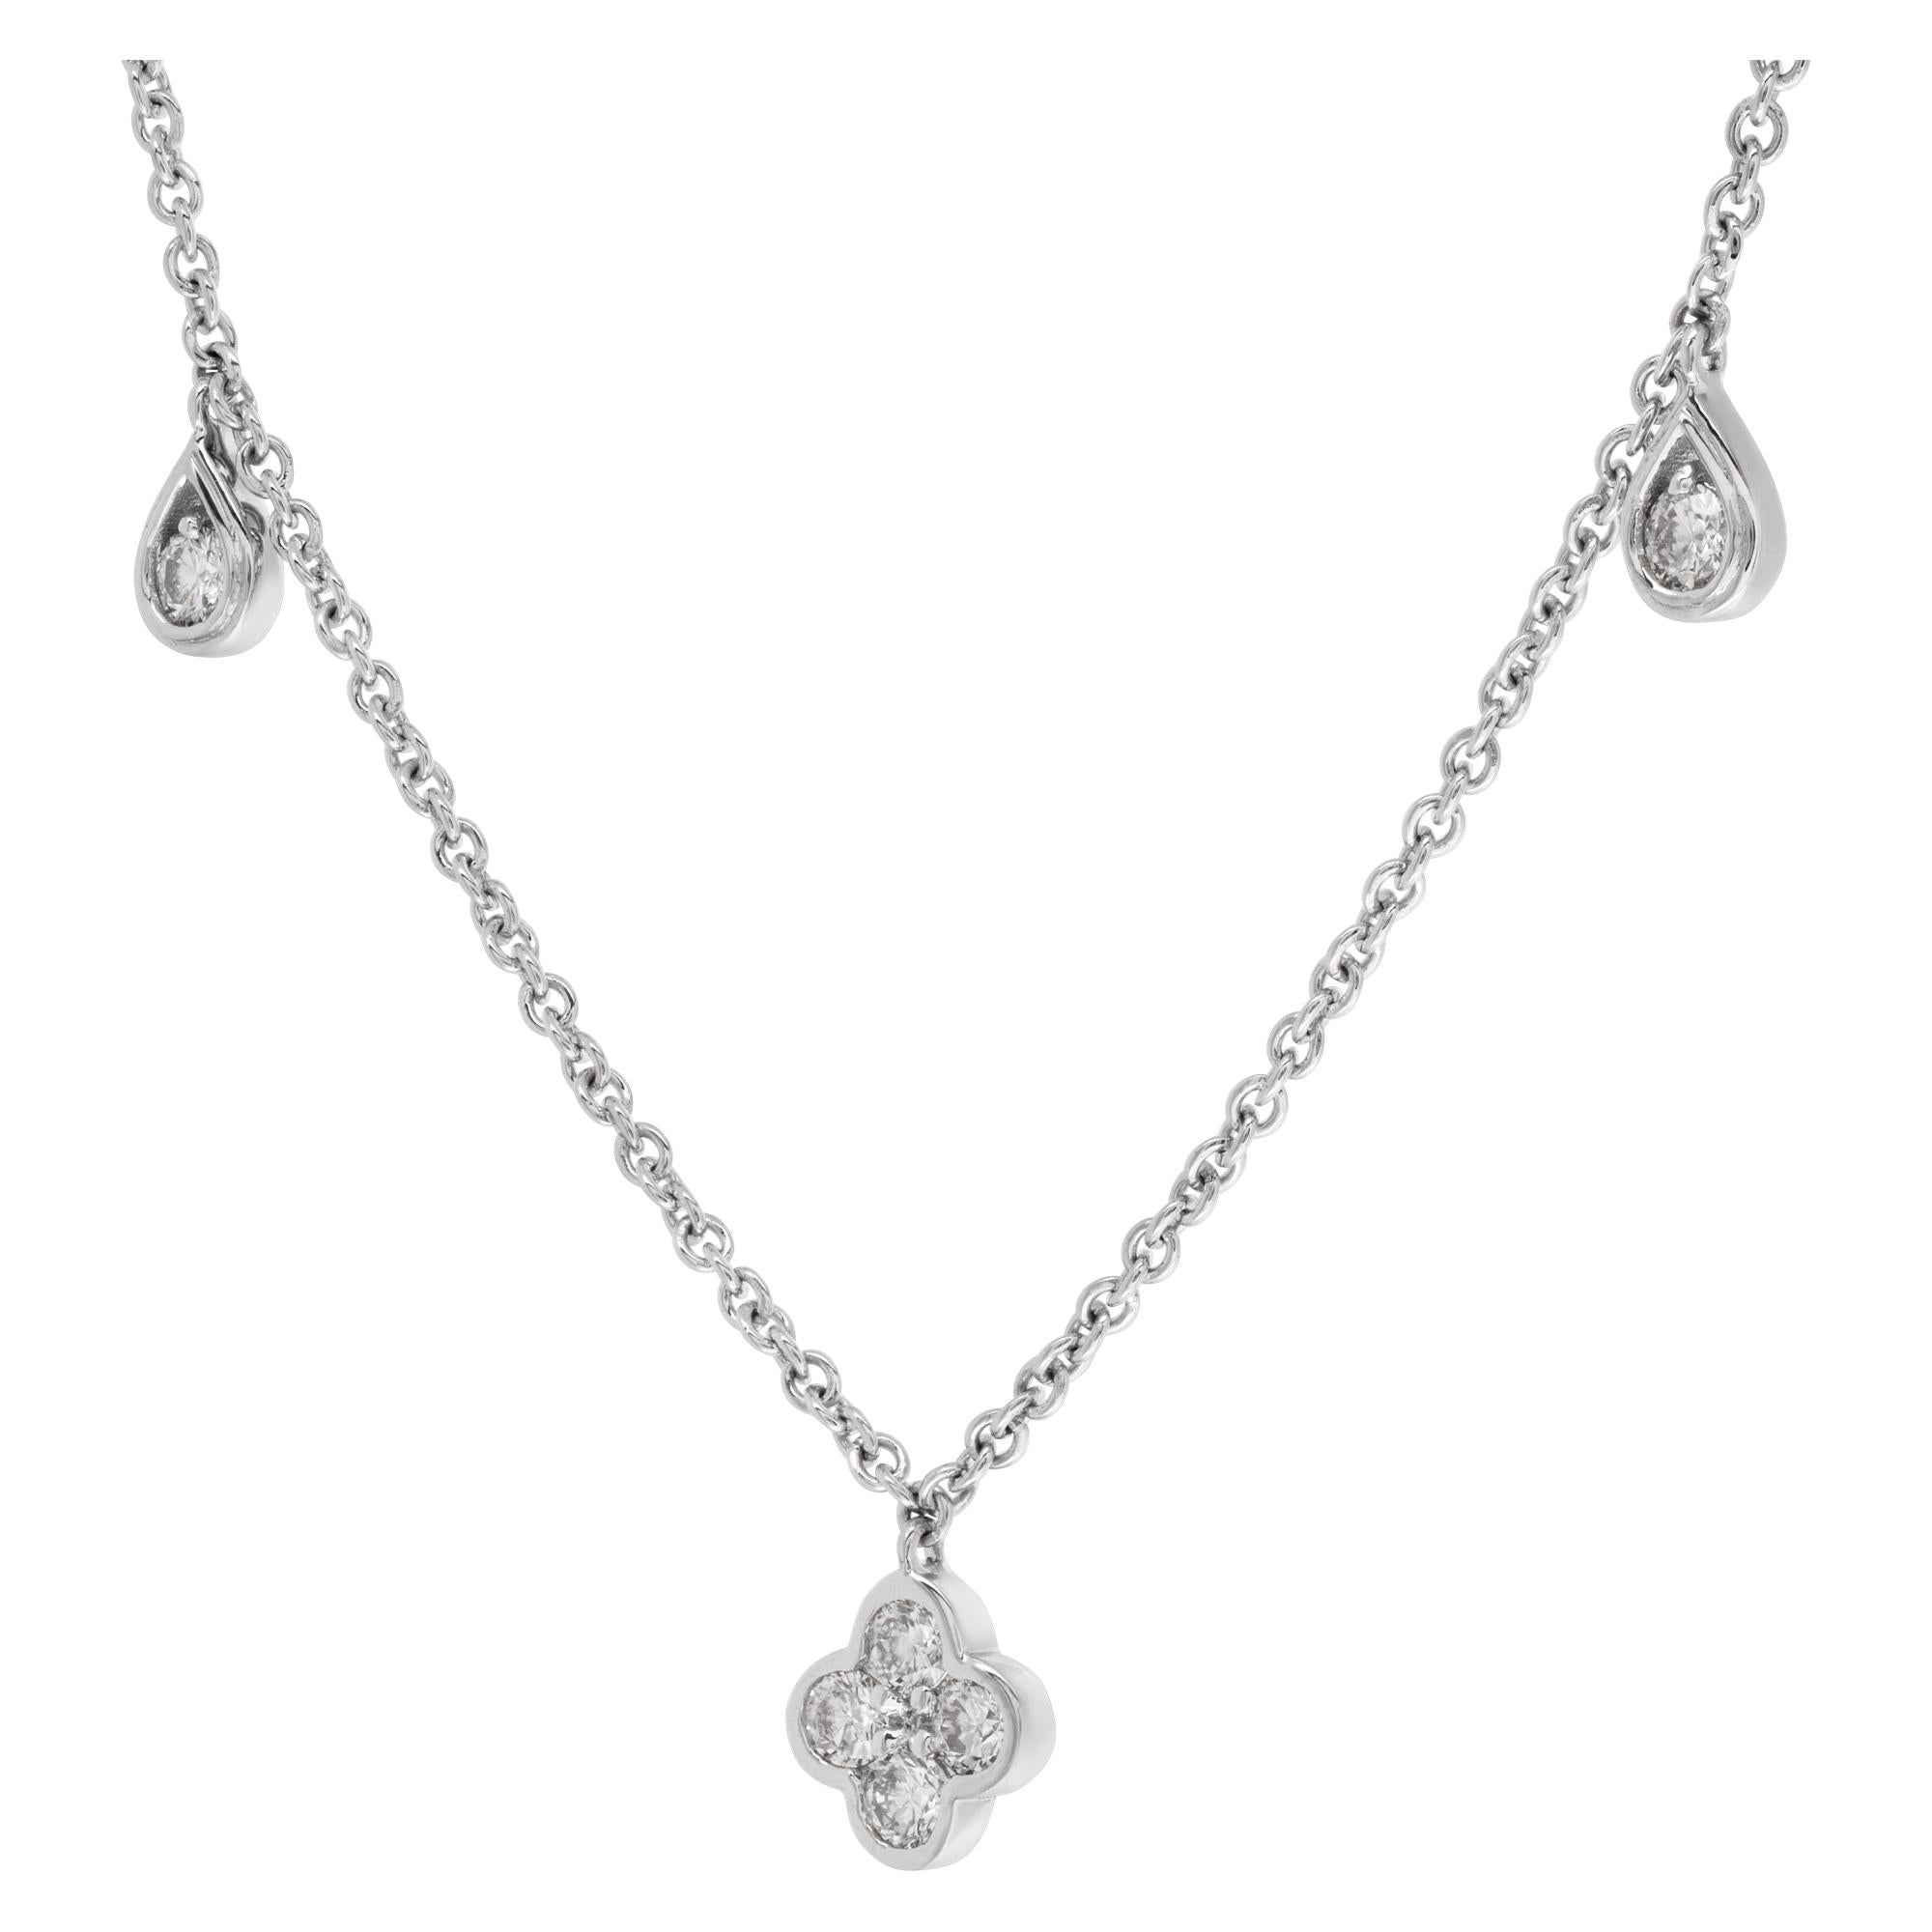 Chain Necklace in 18k White Gold 